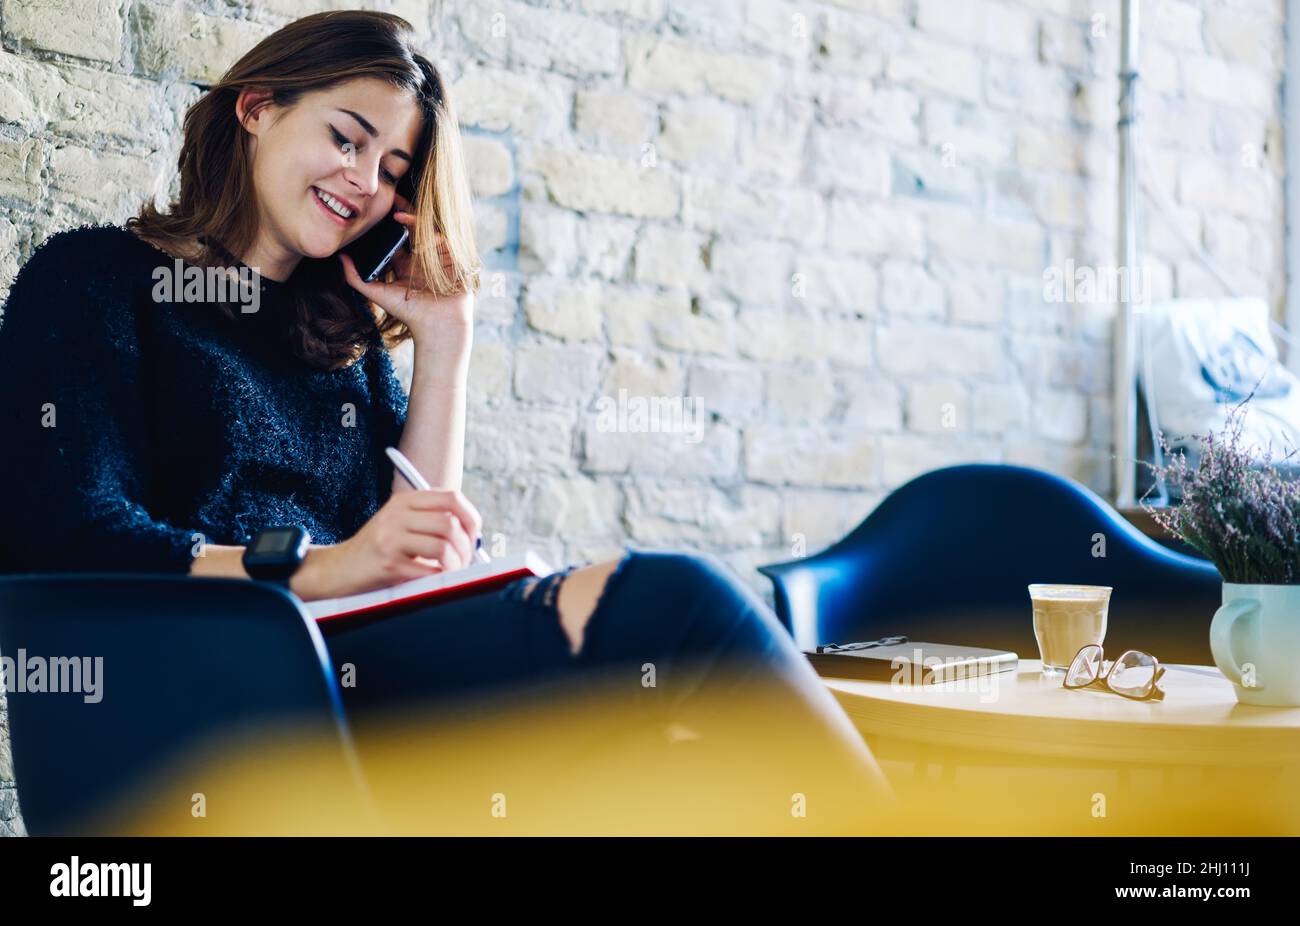 Happy lady sitting in cafe with notebook and smartphone Stock Photo